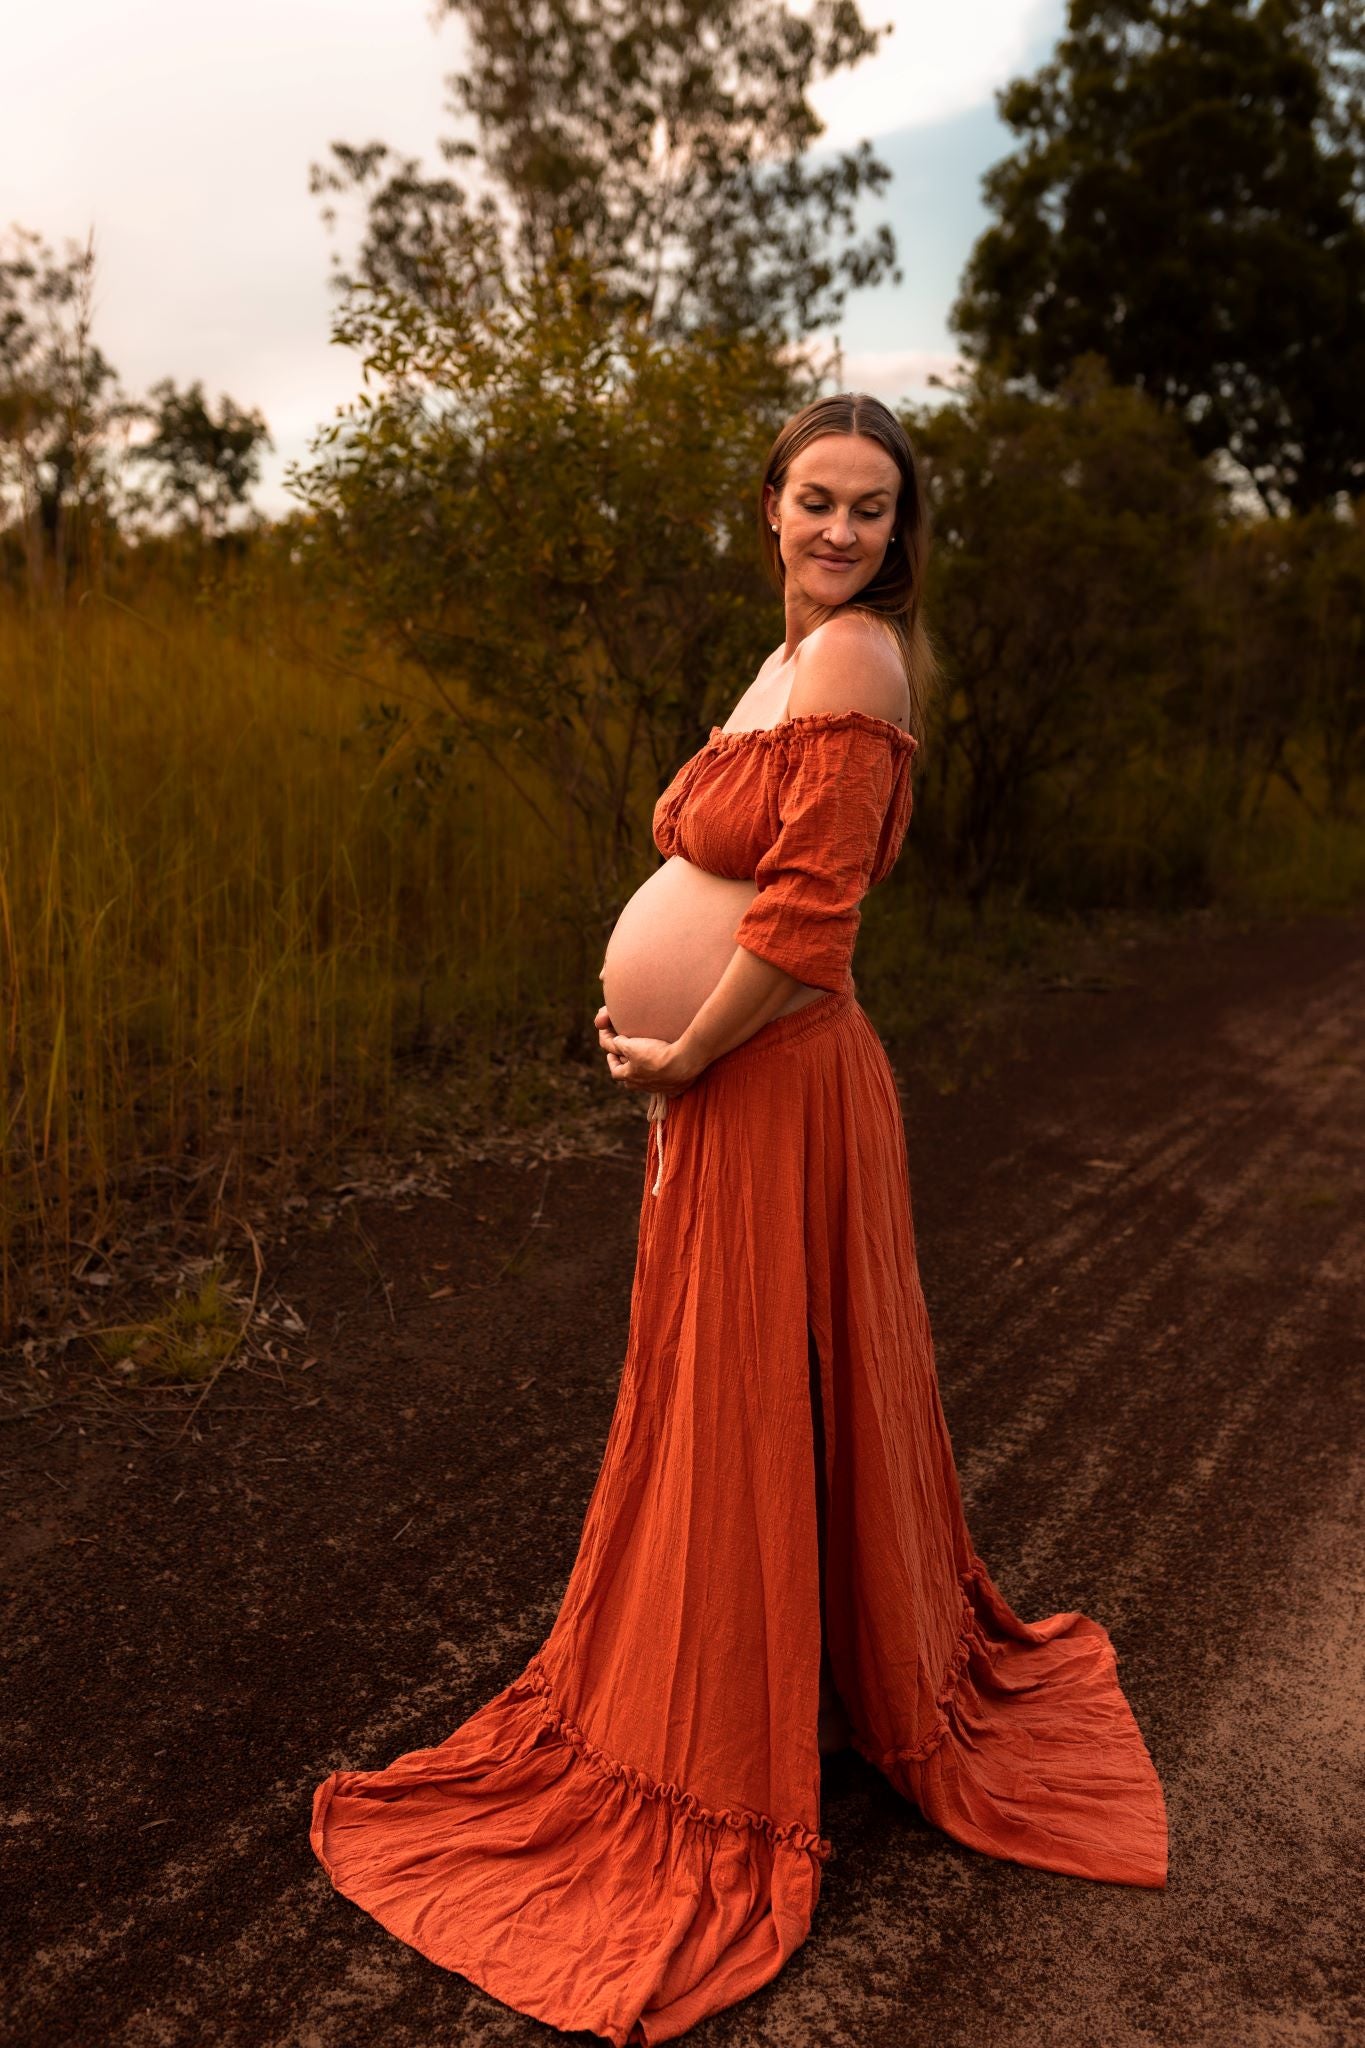 Maternity Photoshoot Dresses - Rusted Red - D&J - Alice Gown 2 Piece Set - 4 DAY RENTAL